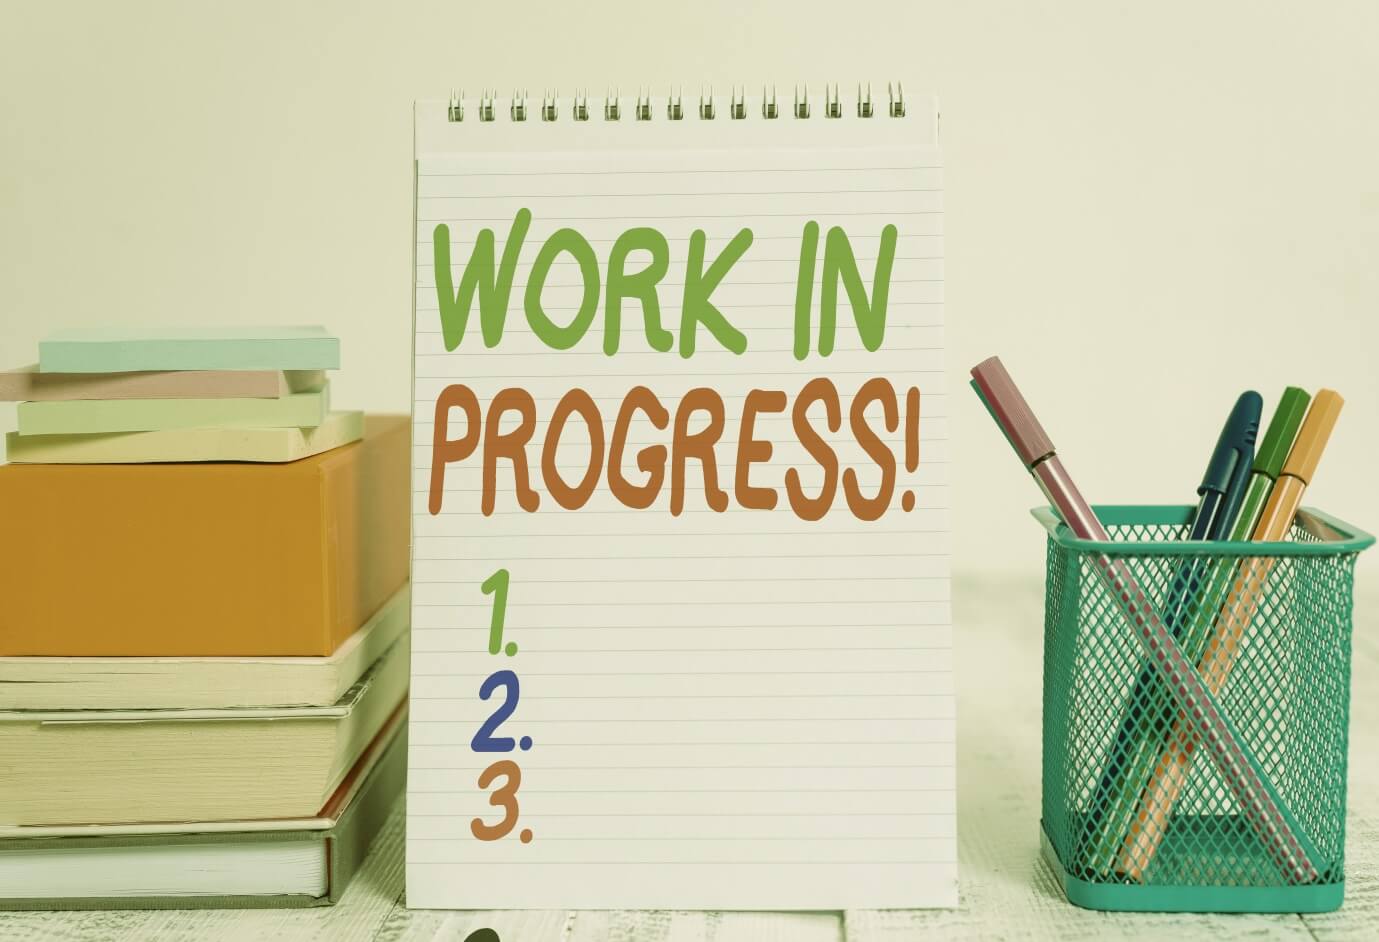 Sign that says 'Work in Progress!' 